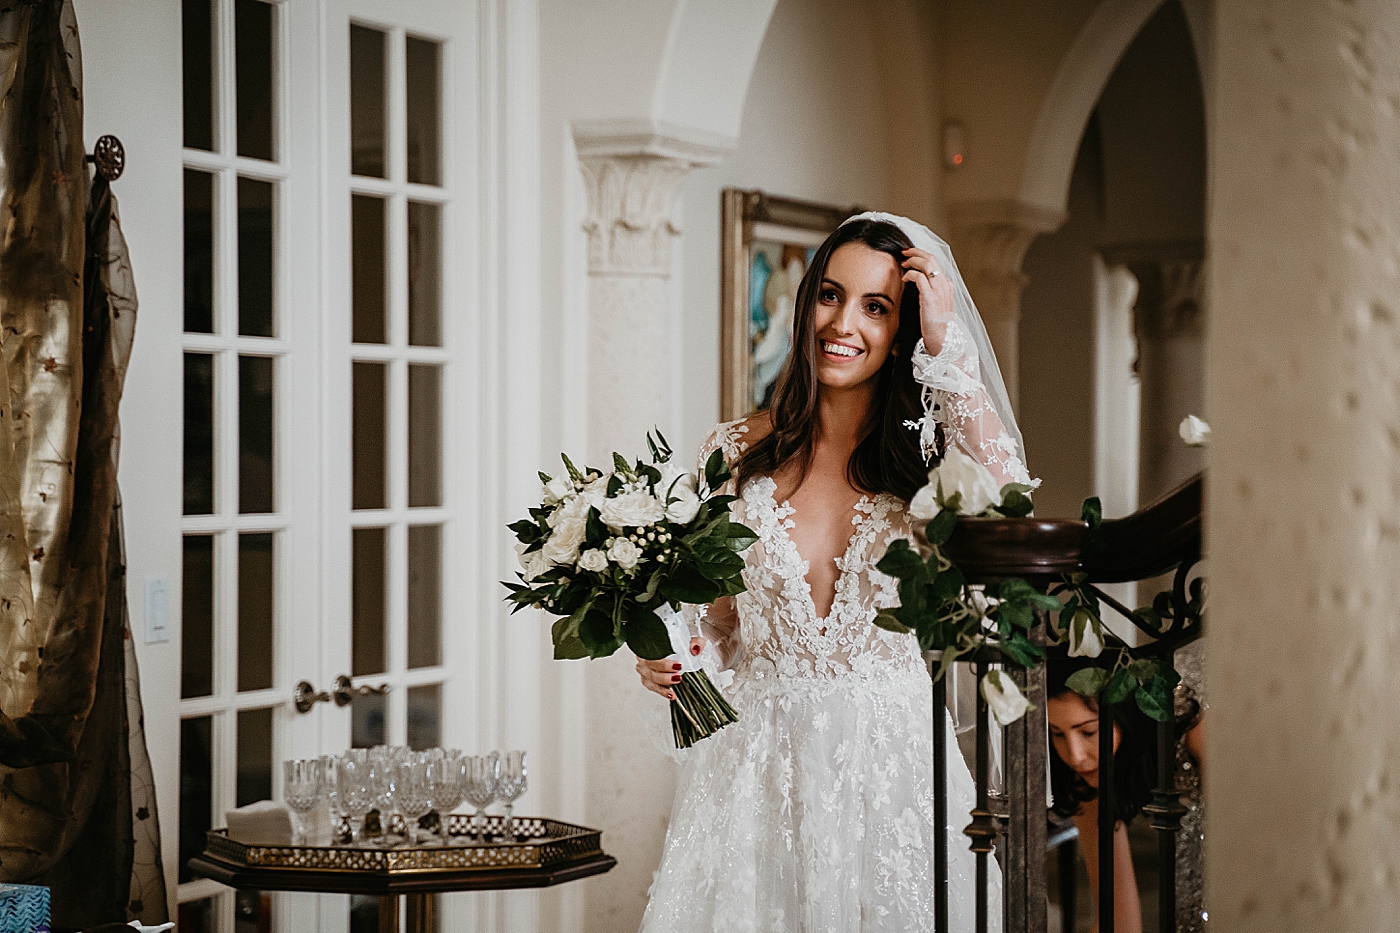 Birde with whie bouquet candid Intimate Home Wedding captured by South Florida Wedding Photographer Krystal Capone Photography